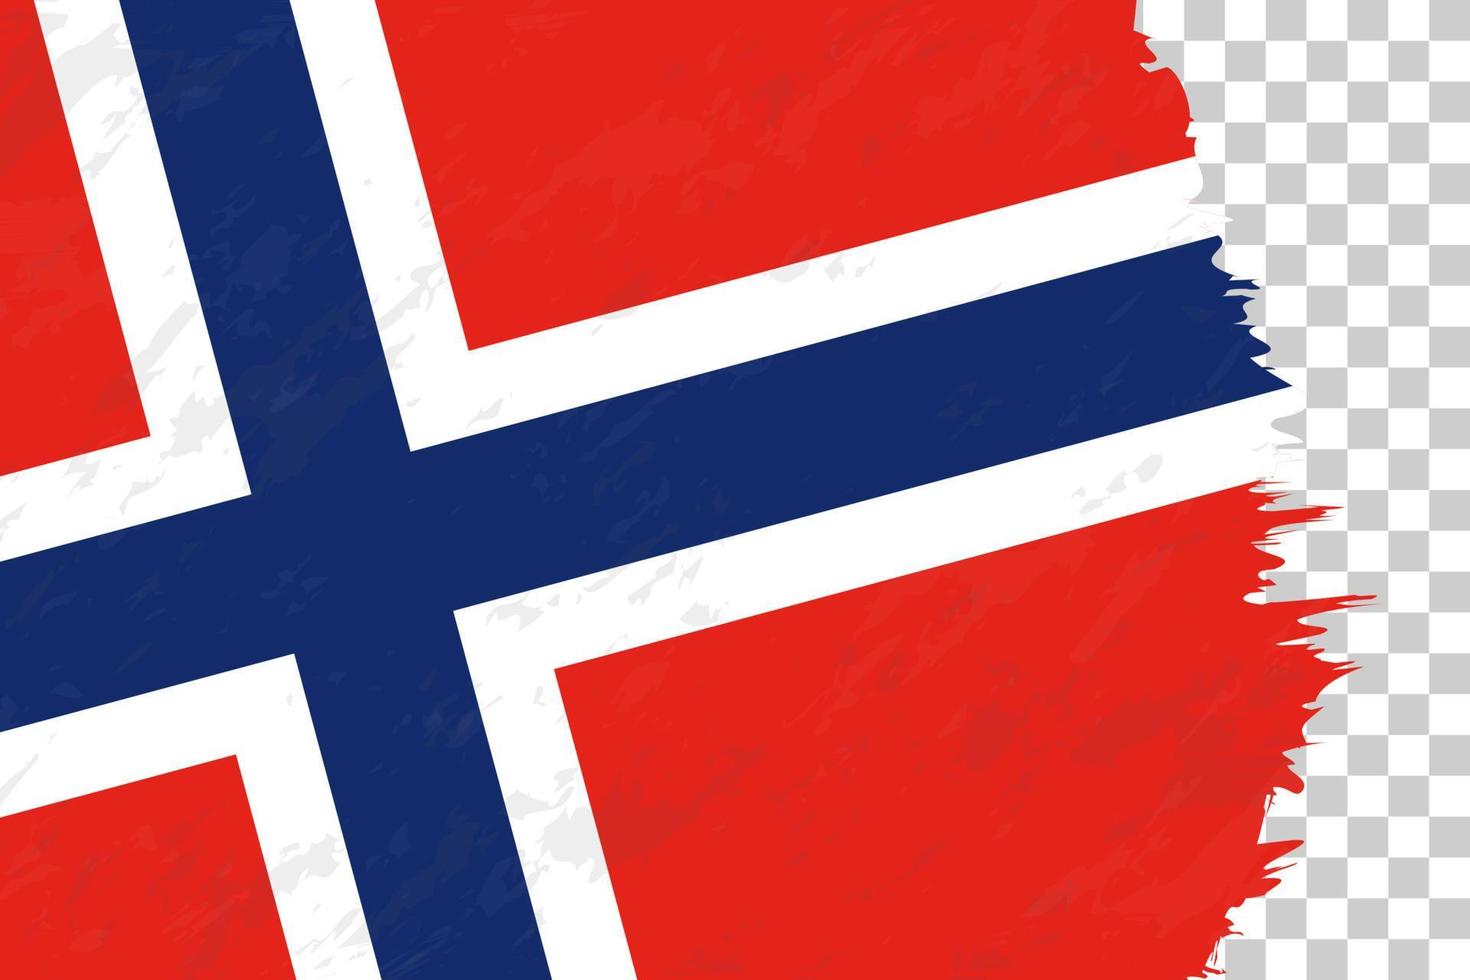 Horizontal Abstract Grunge Brushed Flag of Norway on Transparent Grid. vector